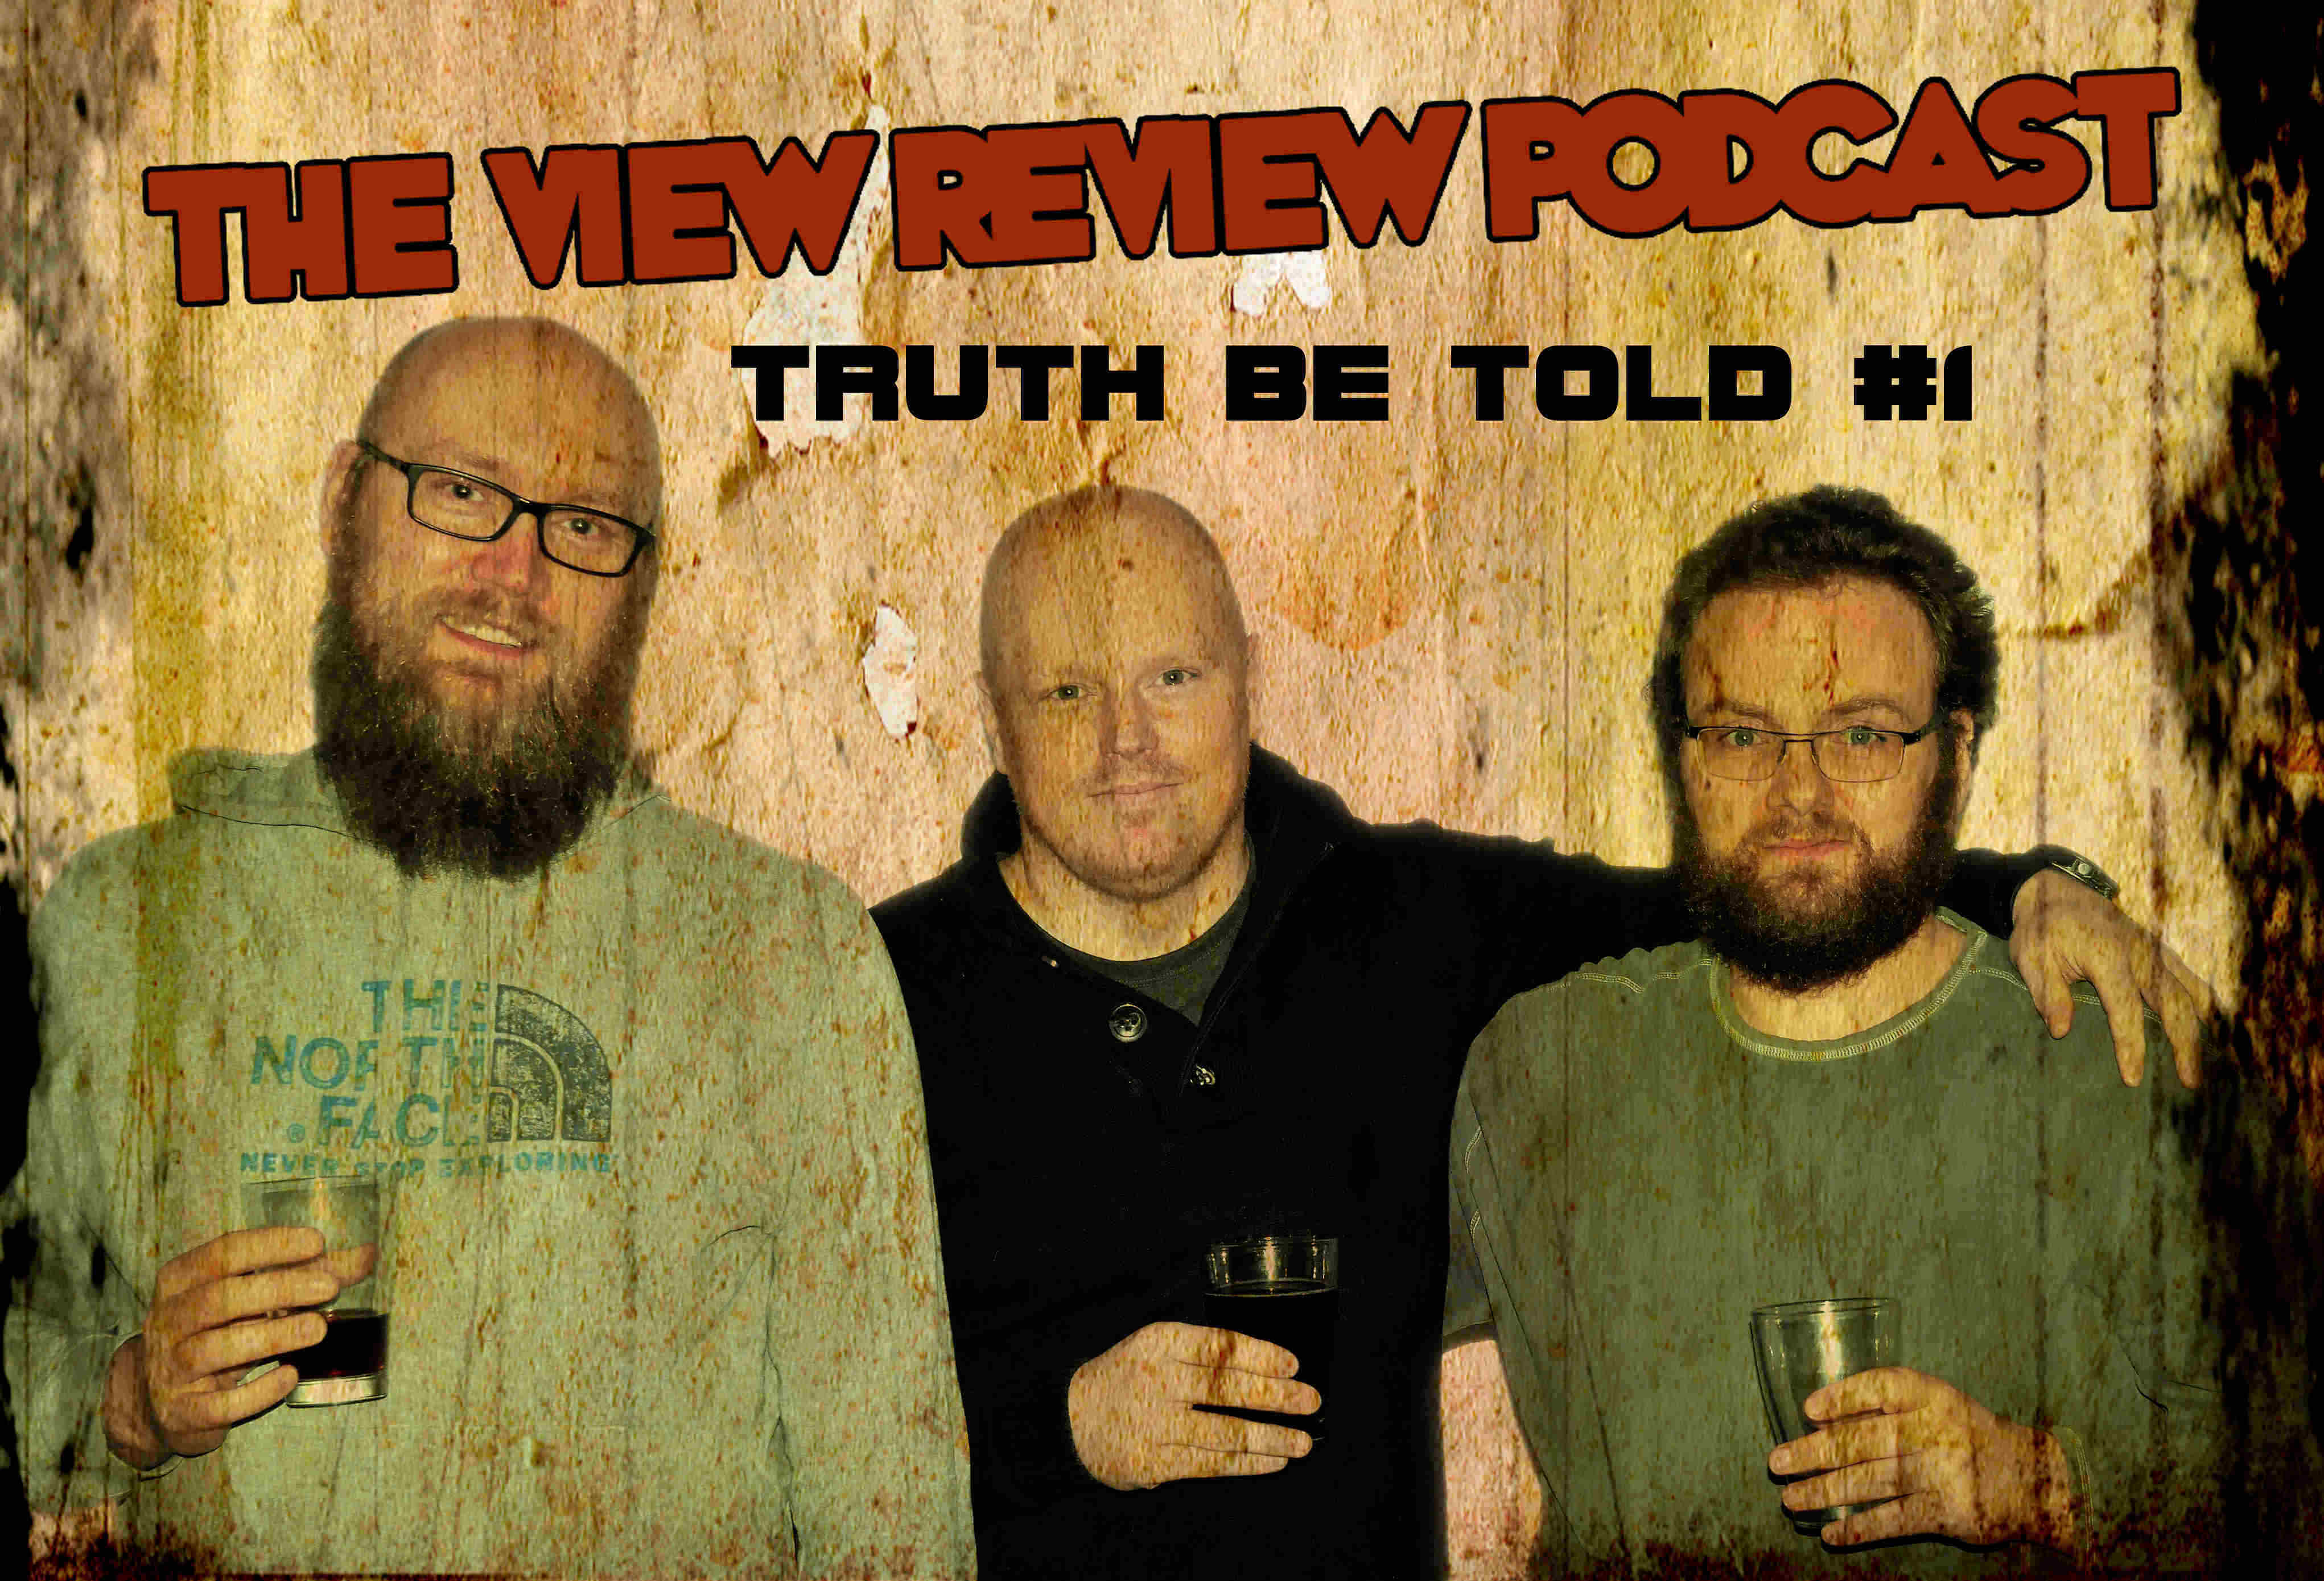 THE VIEW REVIEW PODCAST - EPISODE 61 - 